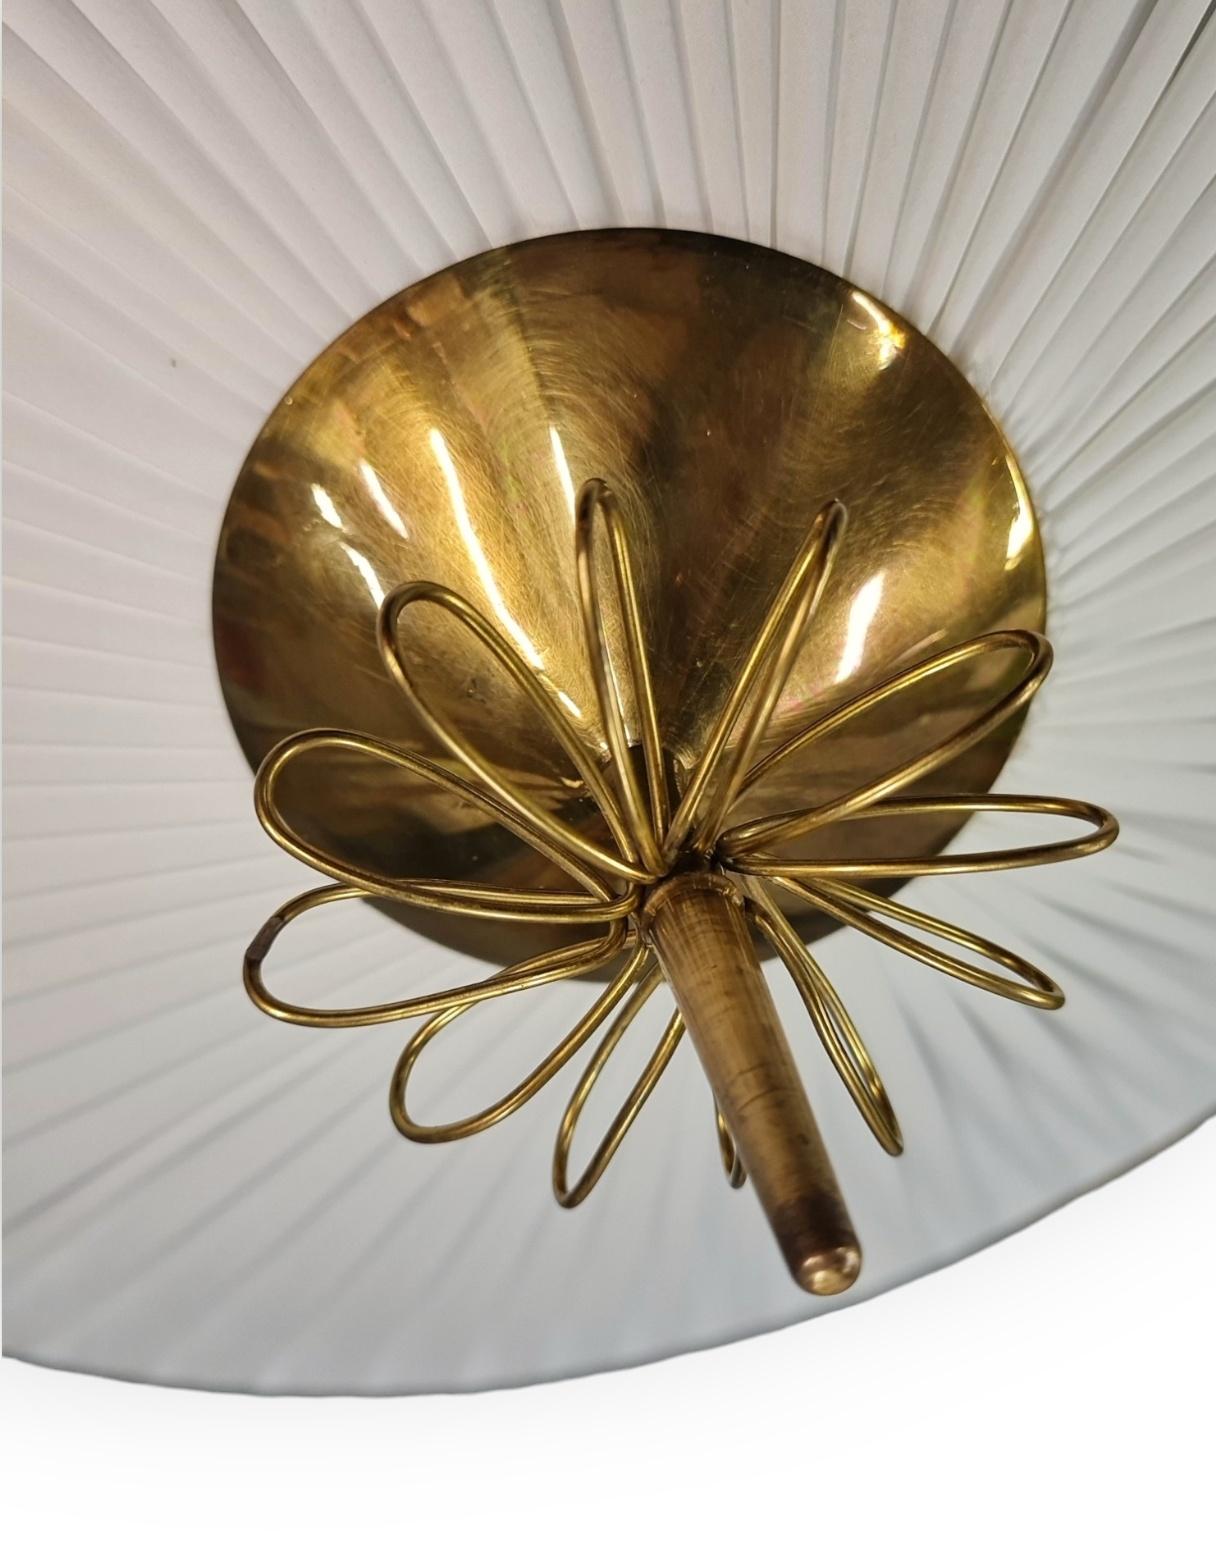 Monumental Paavo Tynell Commissioned Flush Mount in Brass and Fabric, Taito Oy For Sale 8